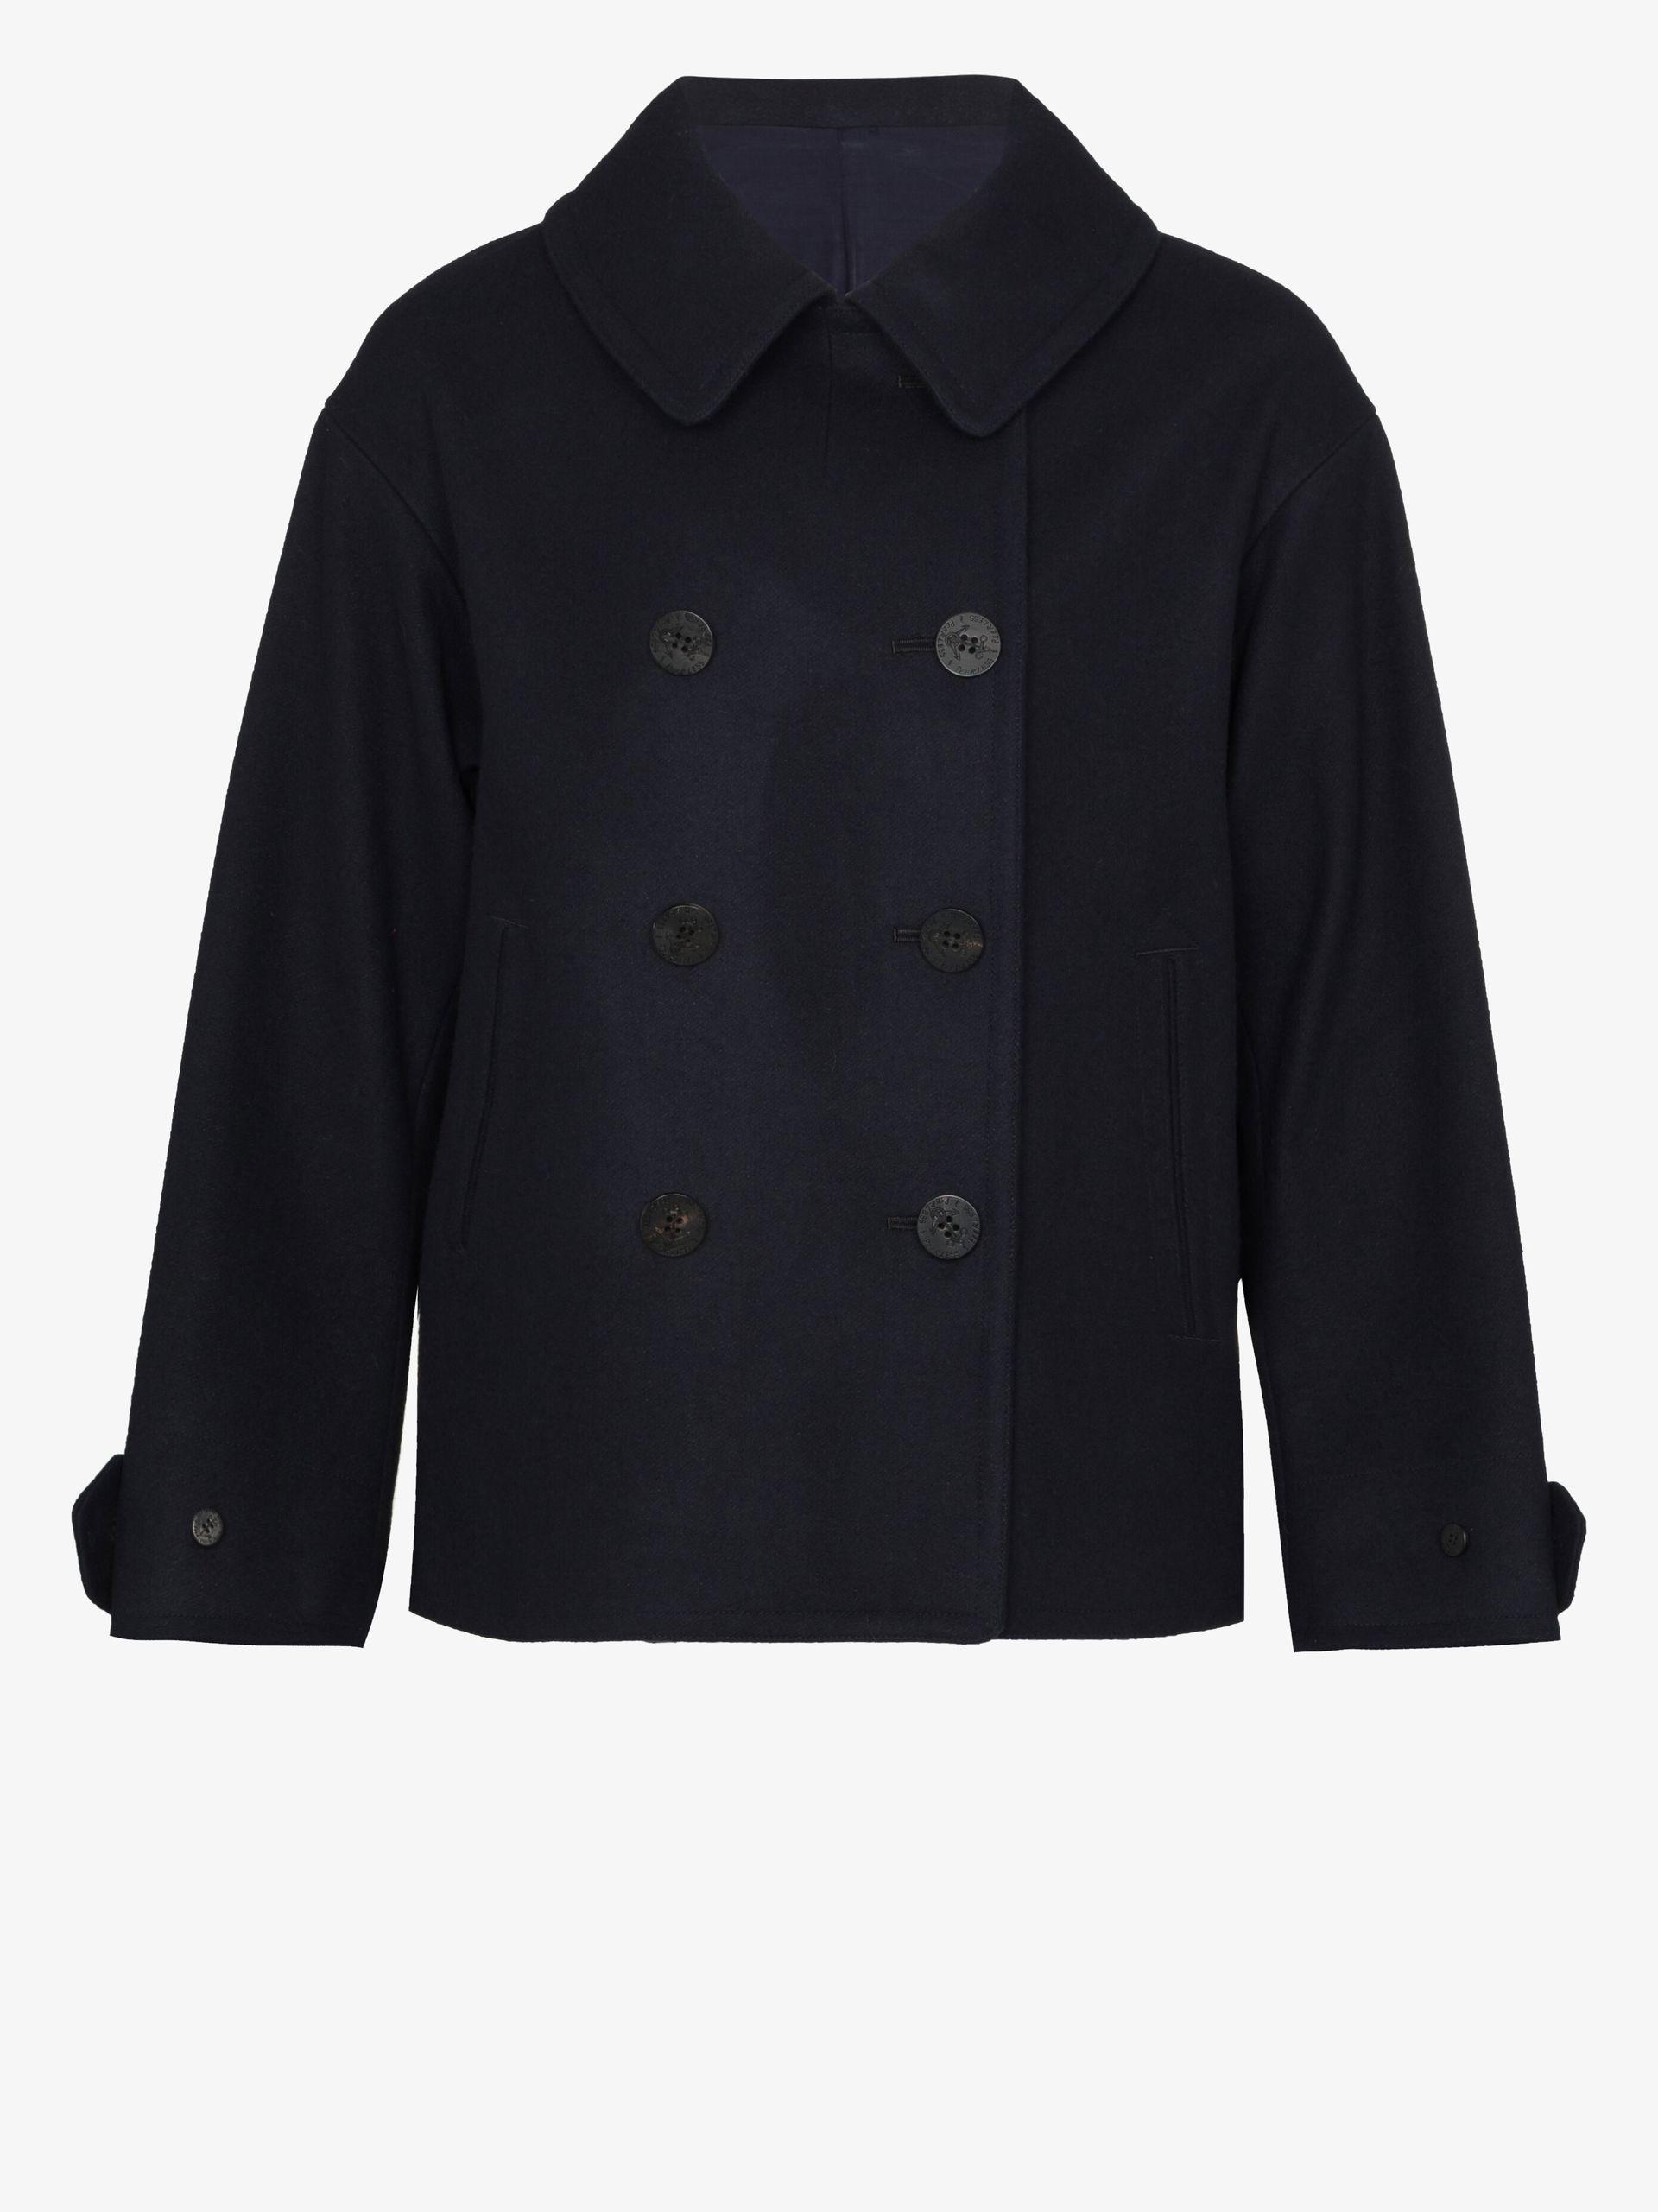 Visvim Pollack Double-breasted Peacoat - Men's - Wool/linen/flax 